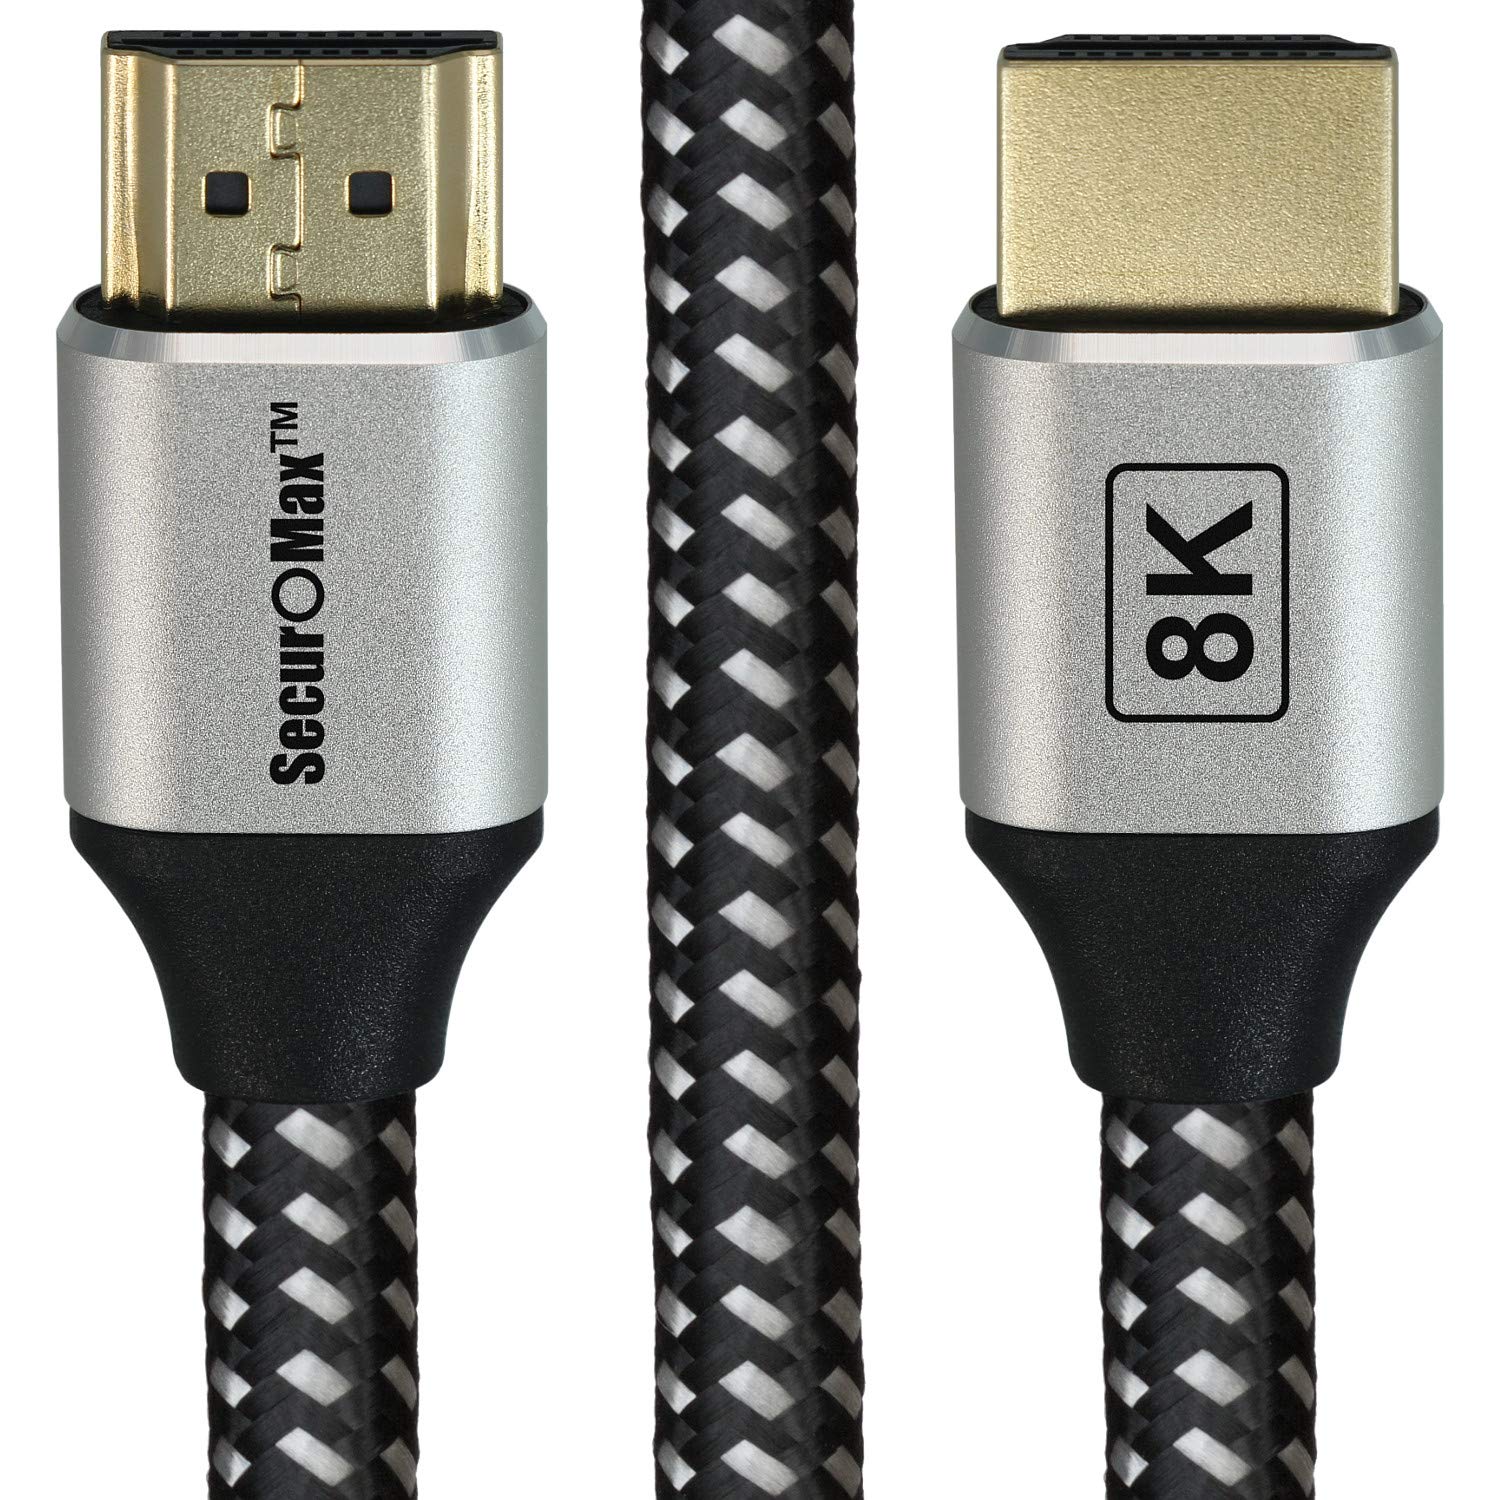 SecurOMax Copper Wired HDMI Cord, 6-Foot